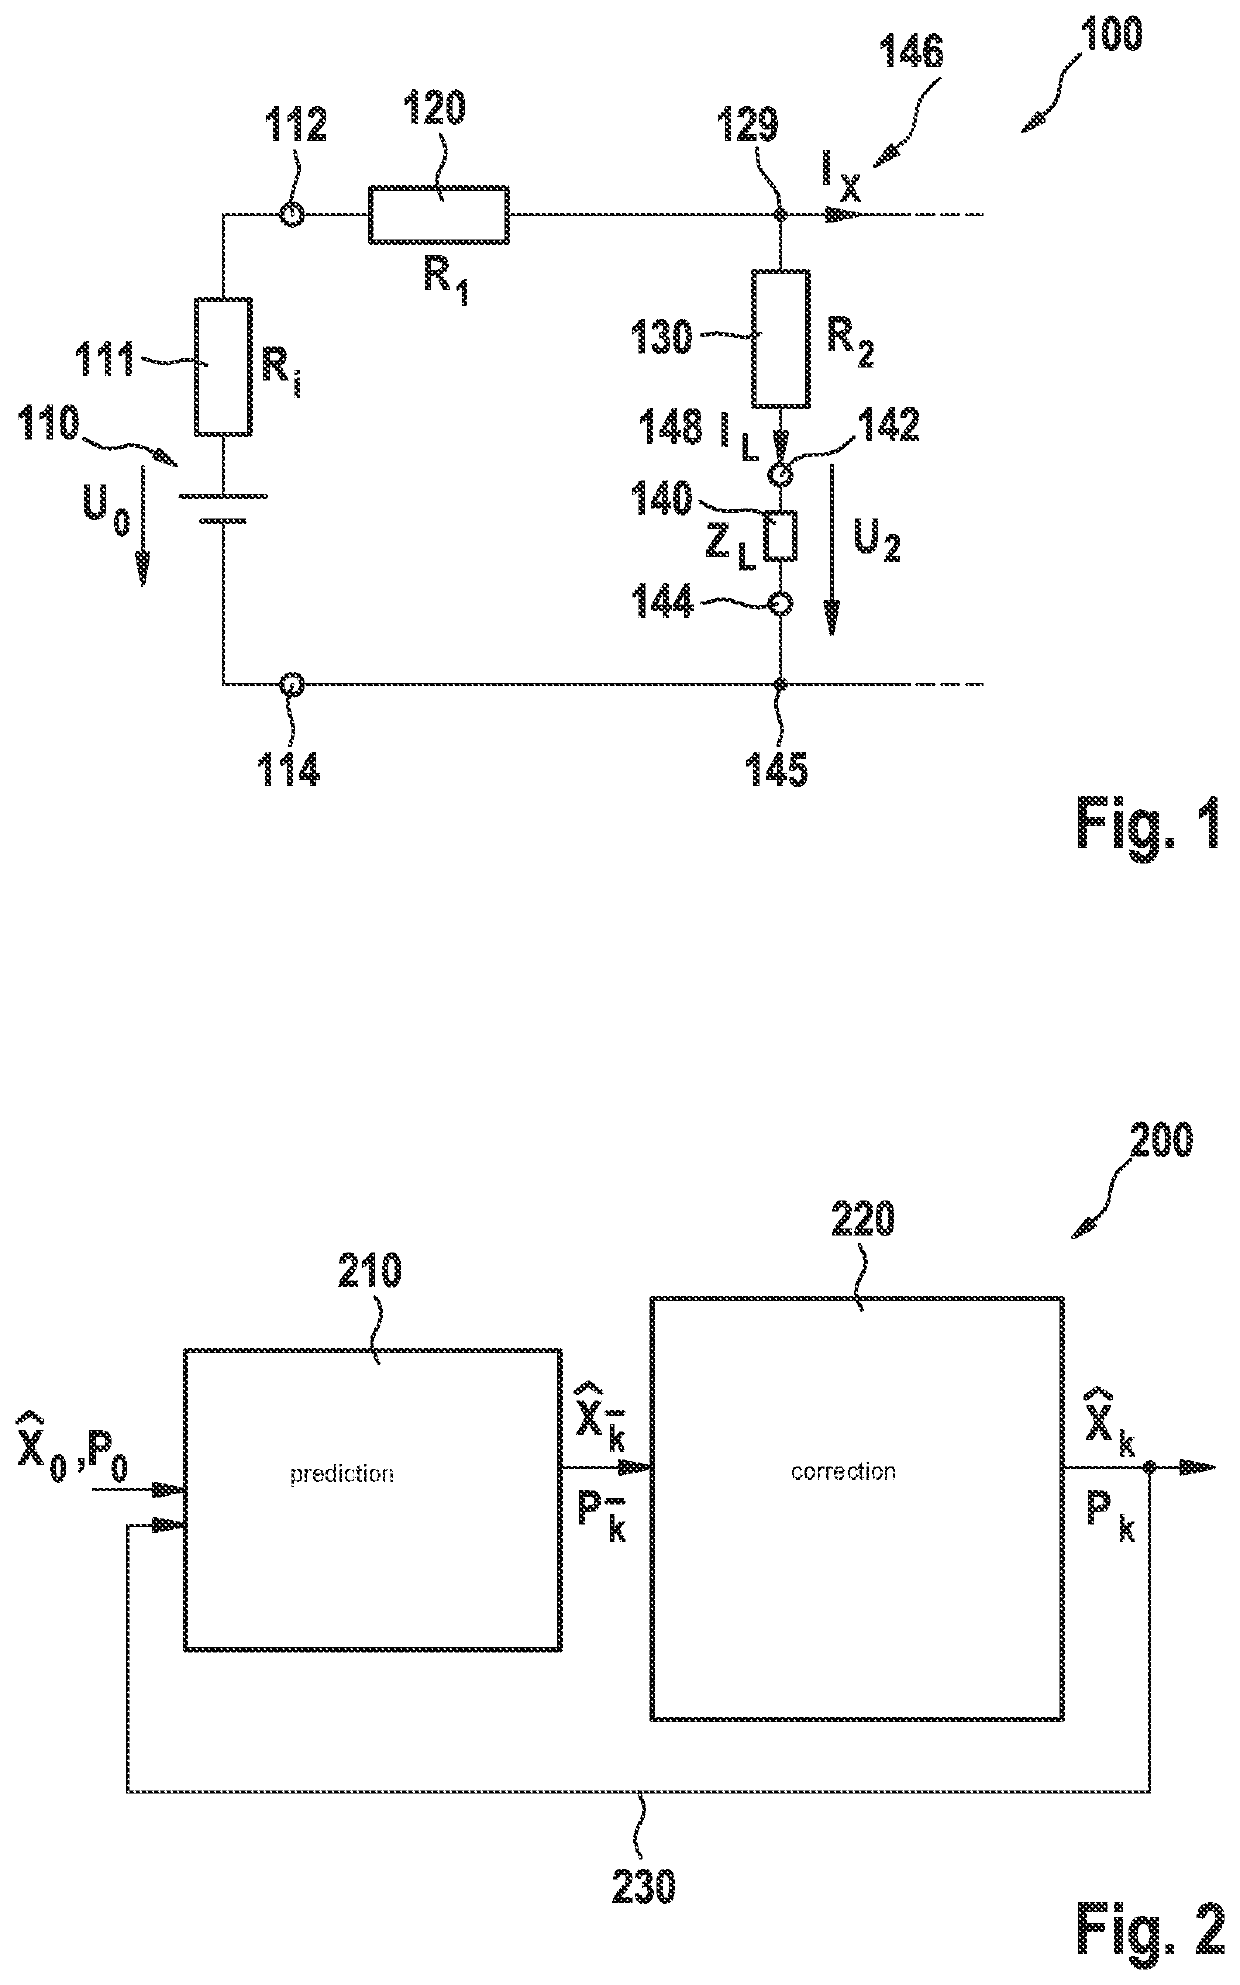 Method for determining an electrical variable